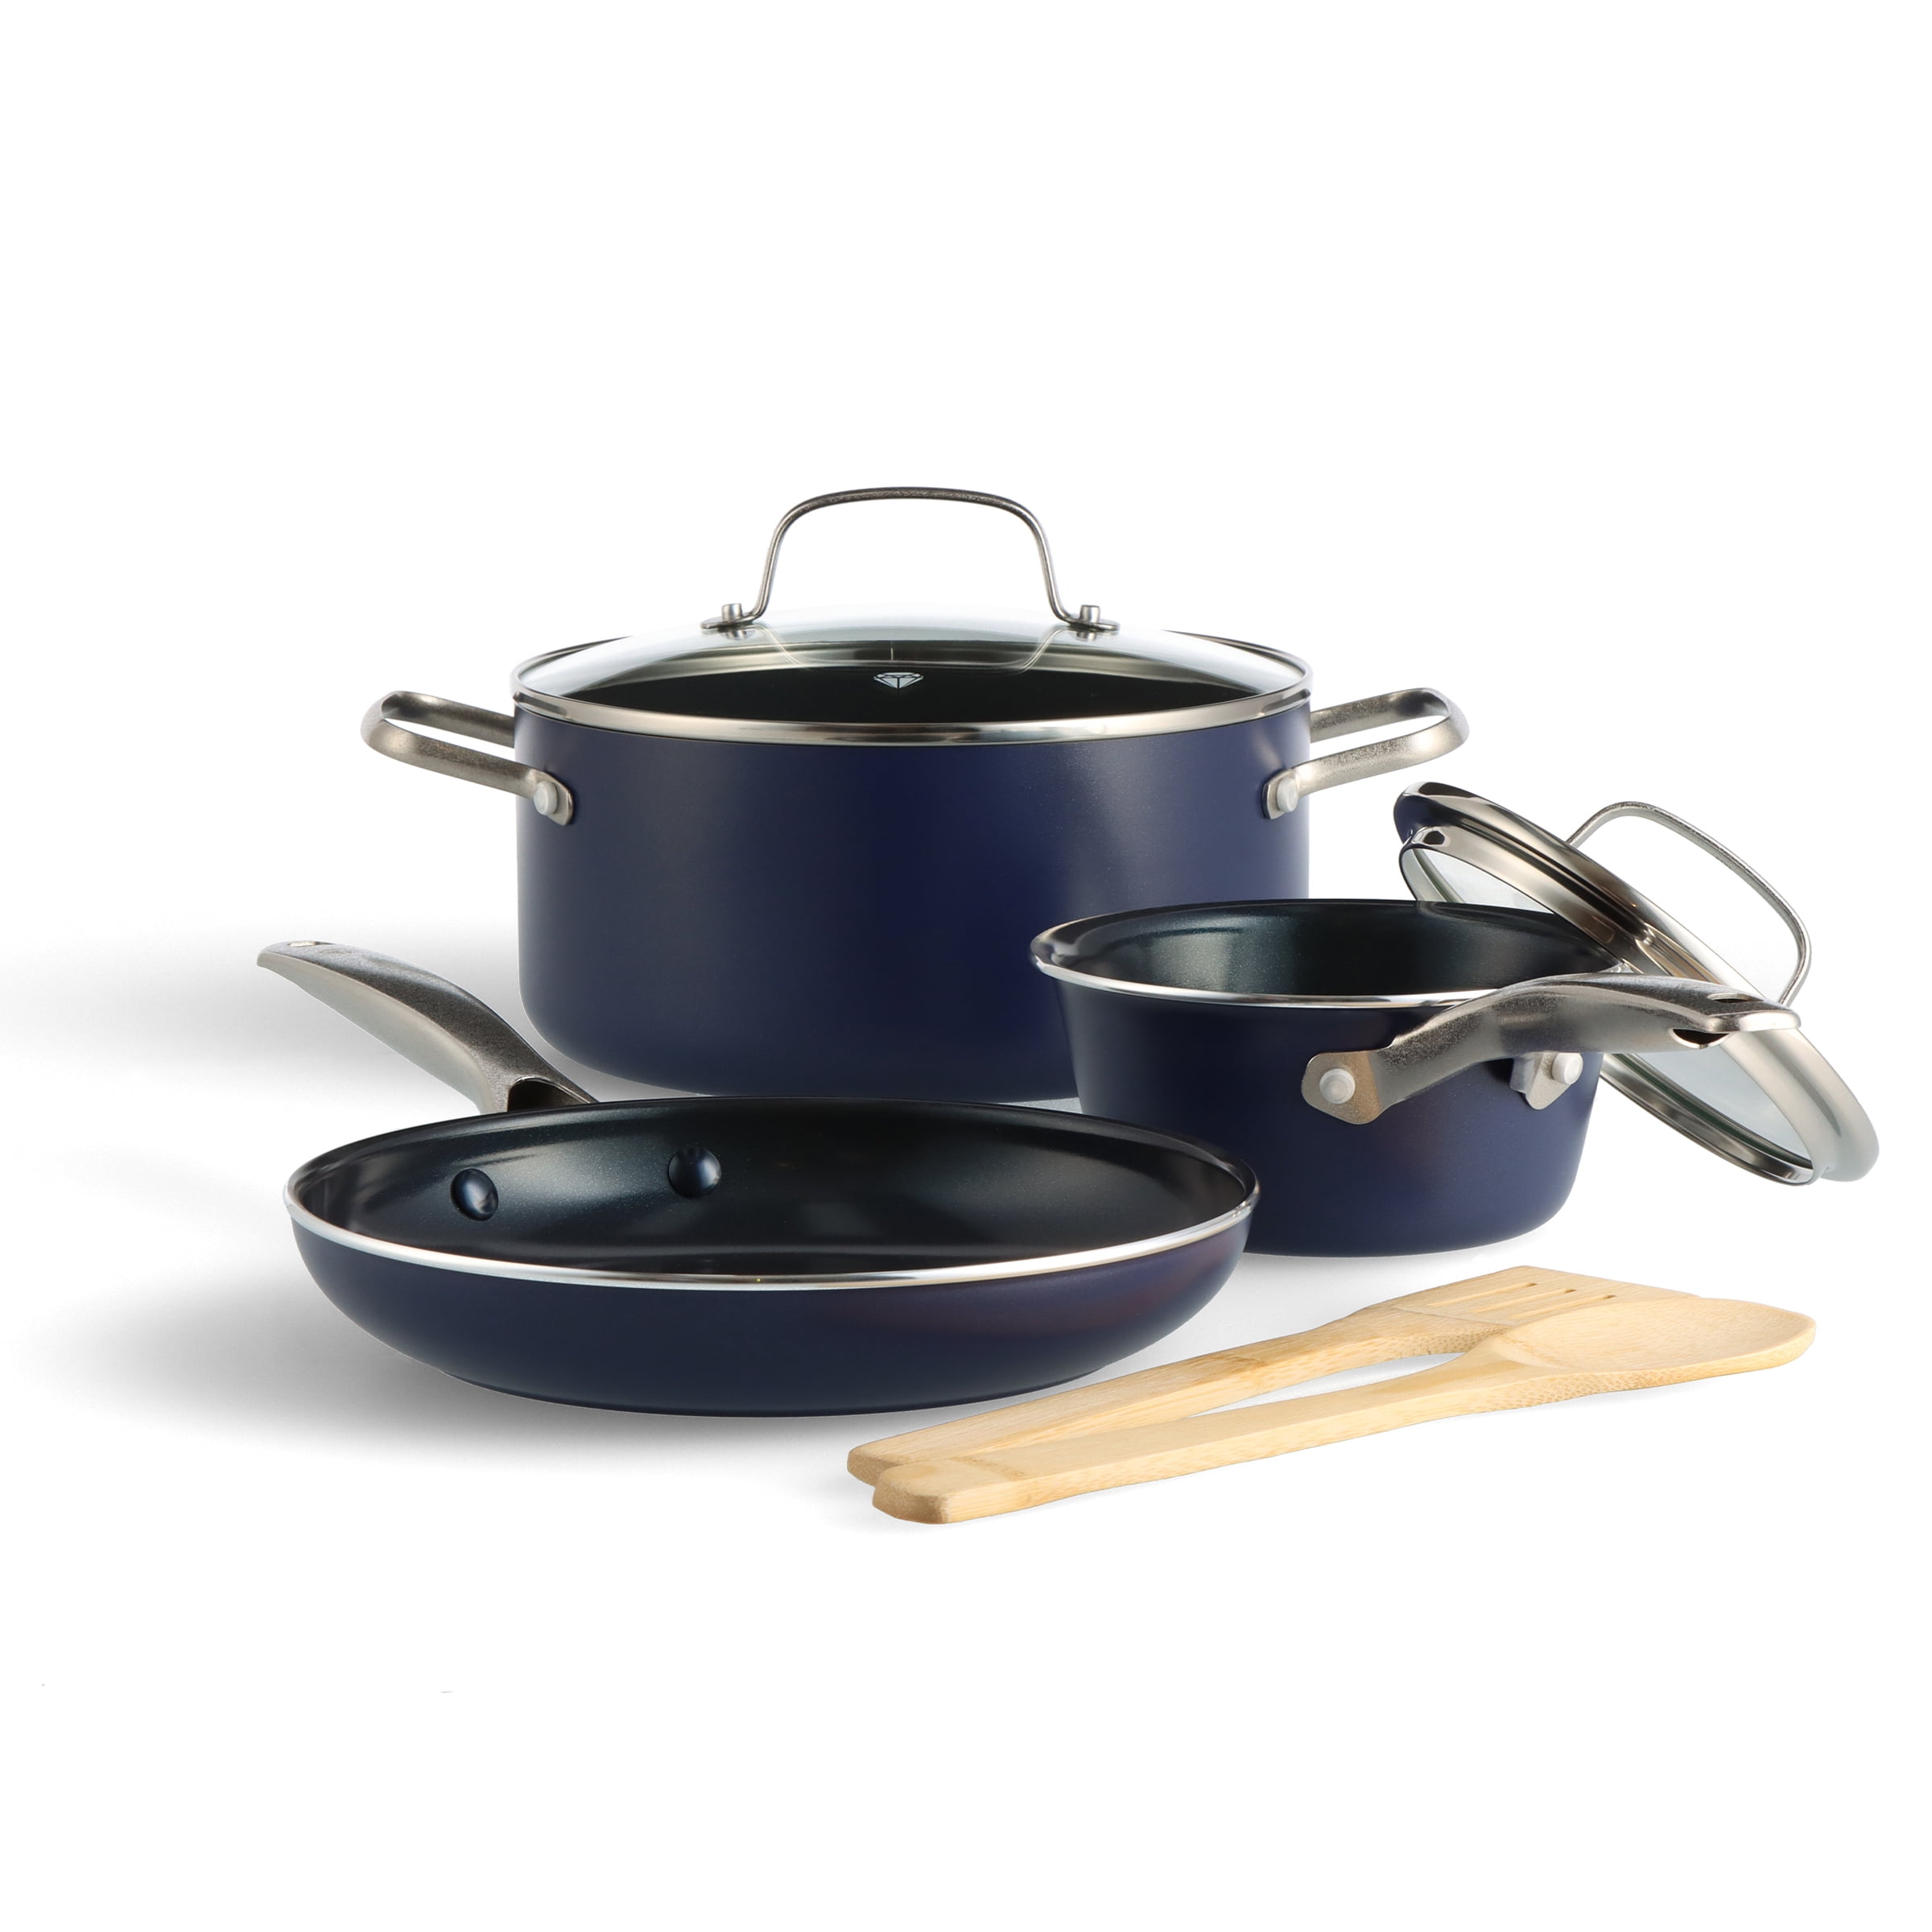 Blue Diamond Cookware Tri-Ply Stainless Steel Ceramic Nonstick, 7 Piece Cookware  Pots and Pans Set, PFAS-Free, Multi Clad, Induction, Dishwasher Safe, Oven  Safe, Silver + FS